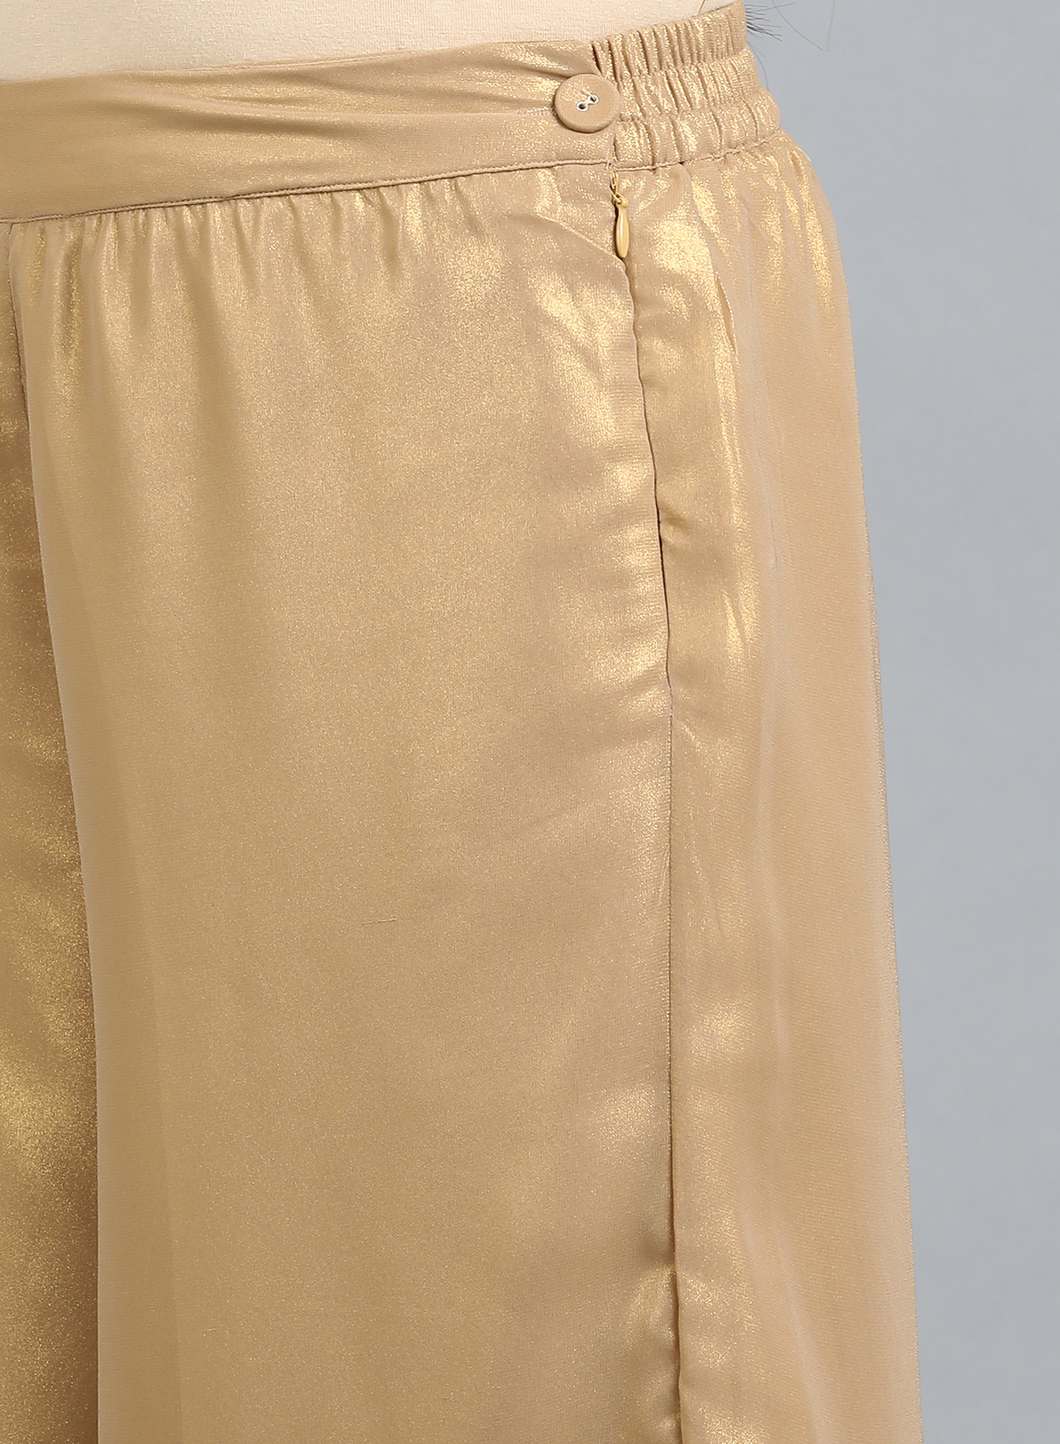 Gold Solid Pants